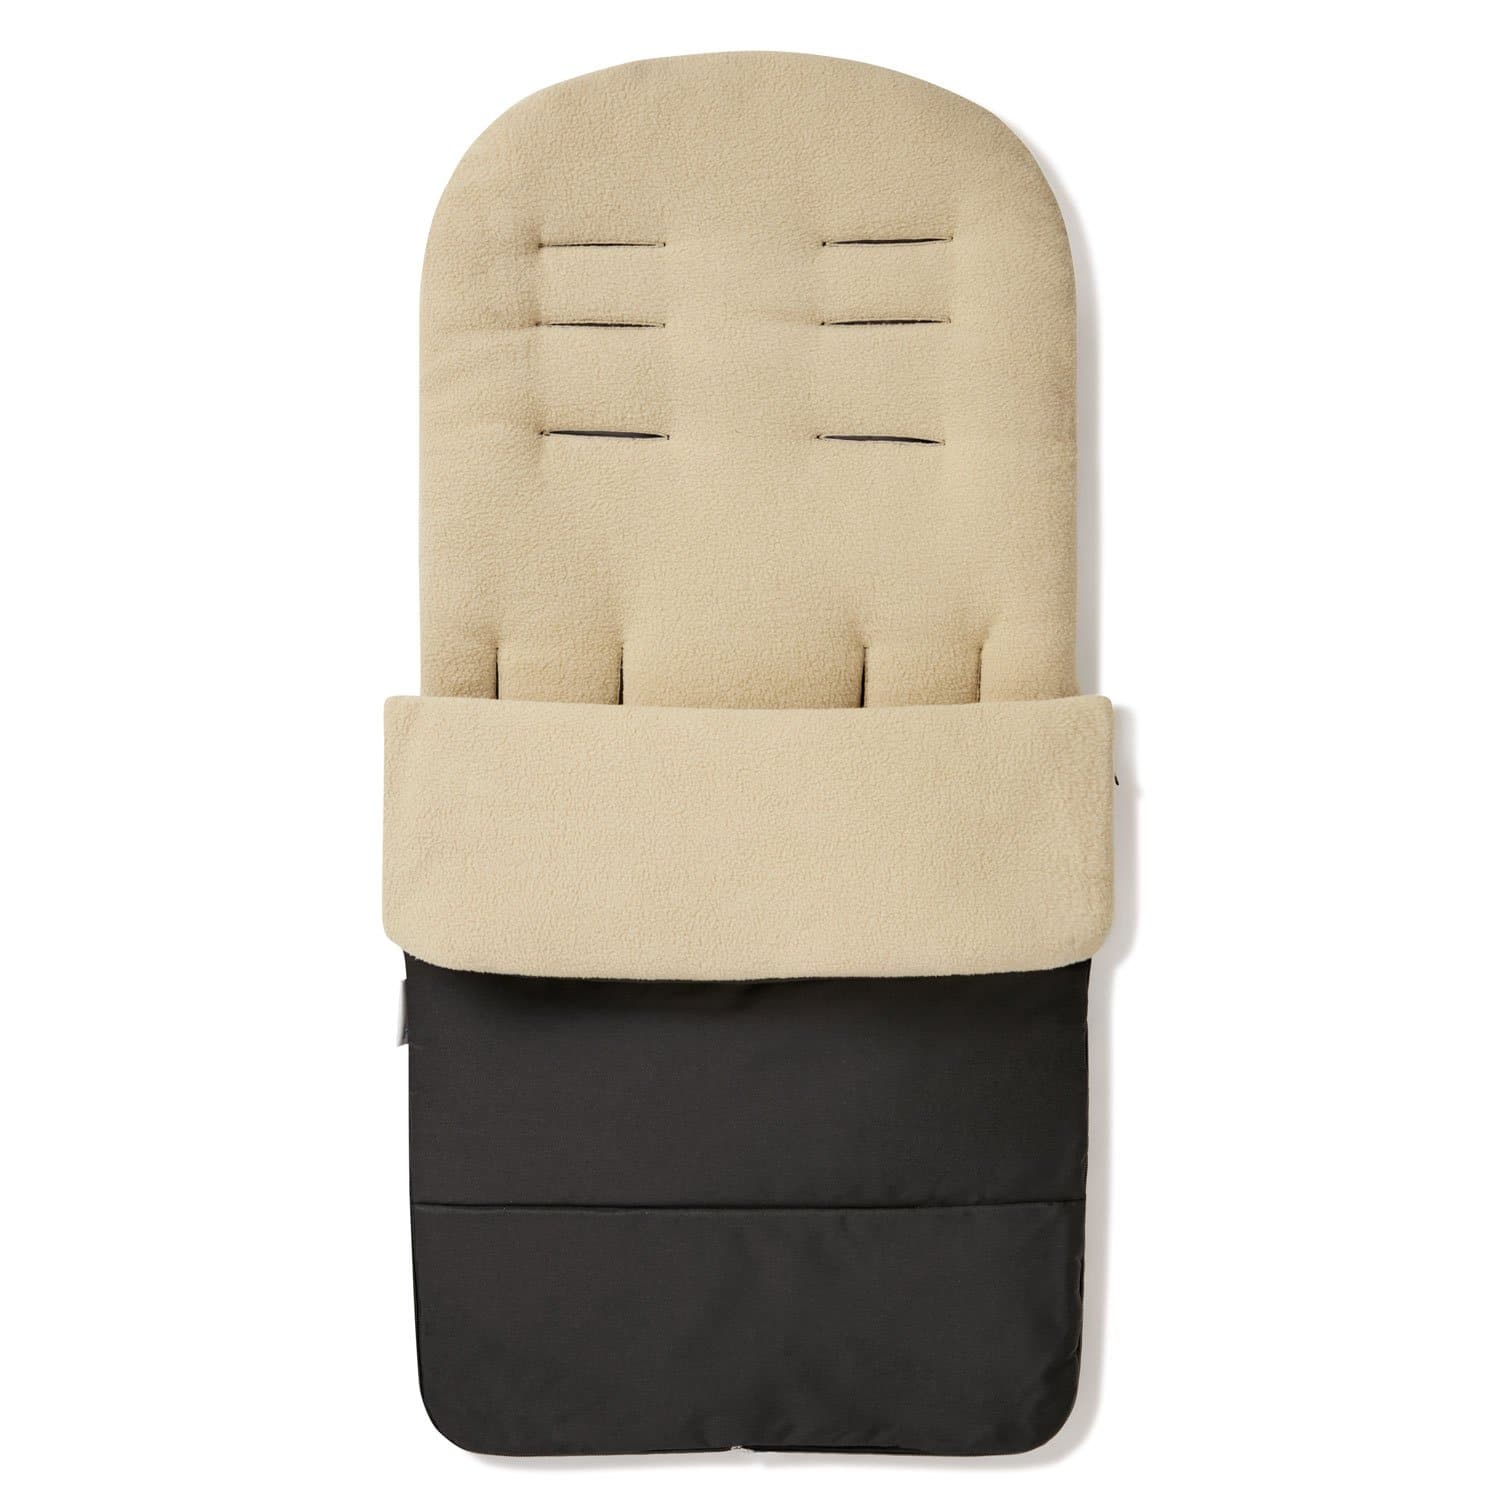 Premium Footmuff / Cosy Toes Compatible with Baby Jogger - Desert Sand / Fits All Models | For Your Little One